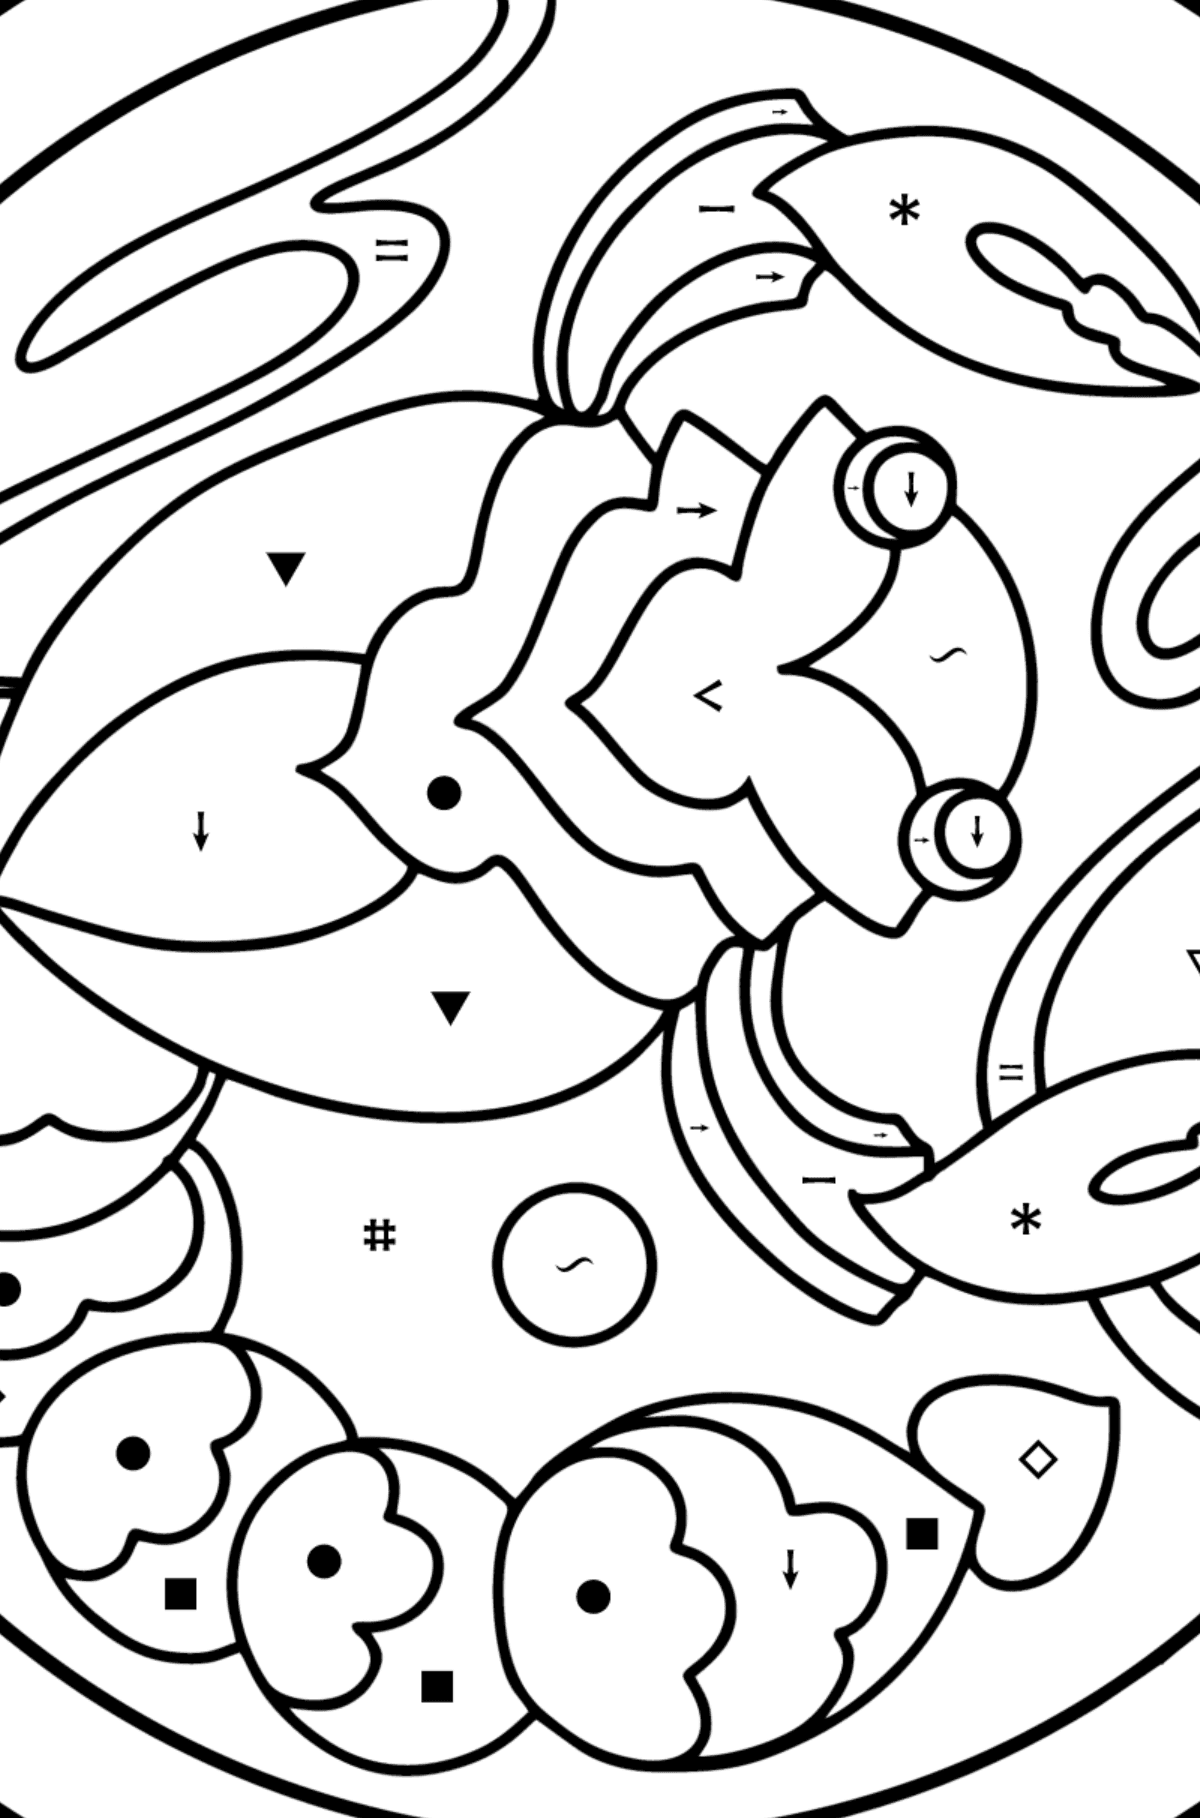 Coloring page for kids - zodiac sign Scorpio - Coloring by Symbols for Kids